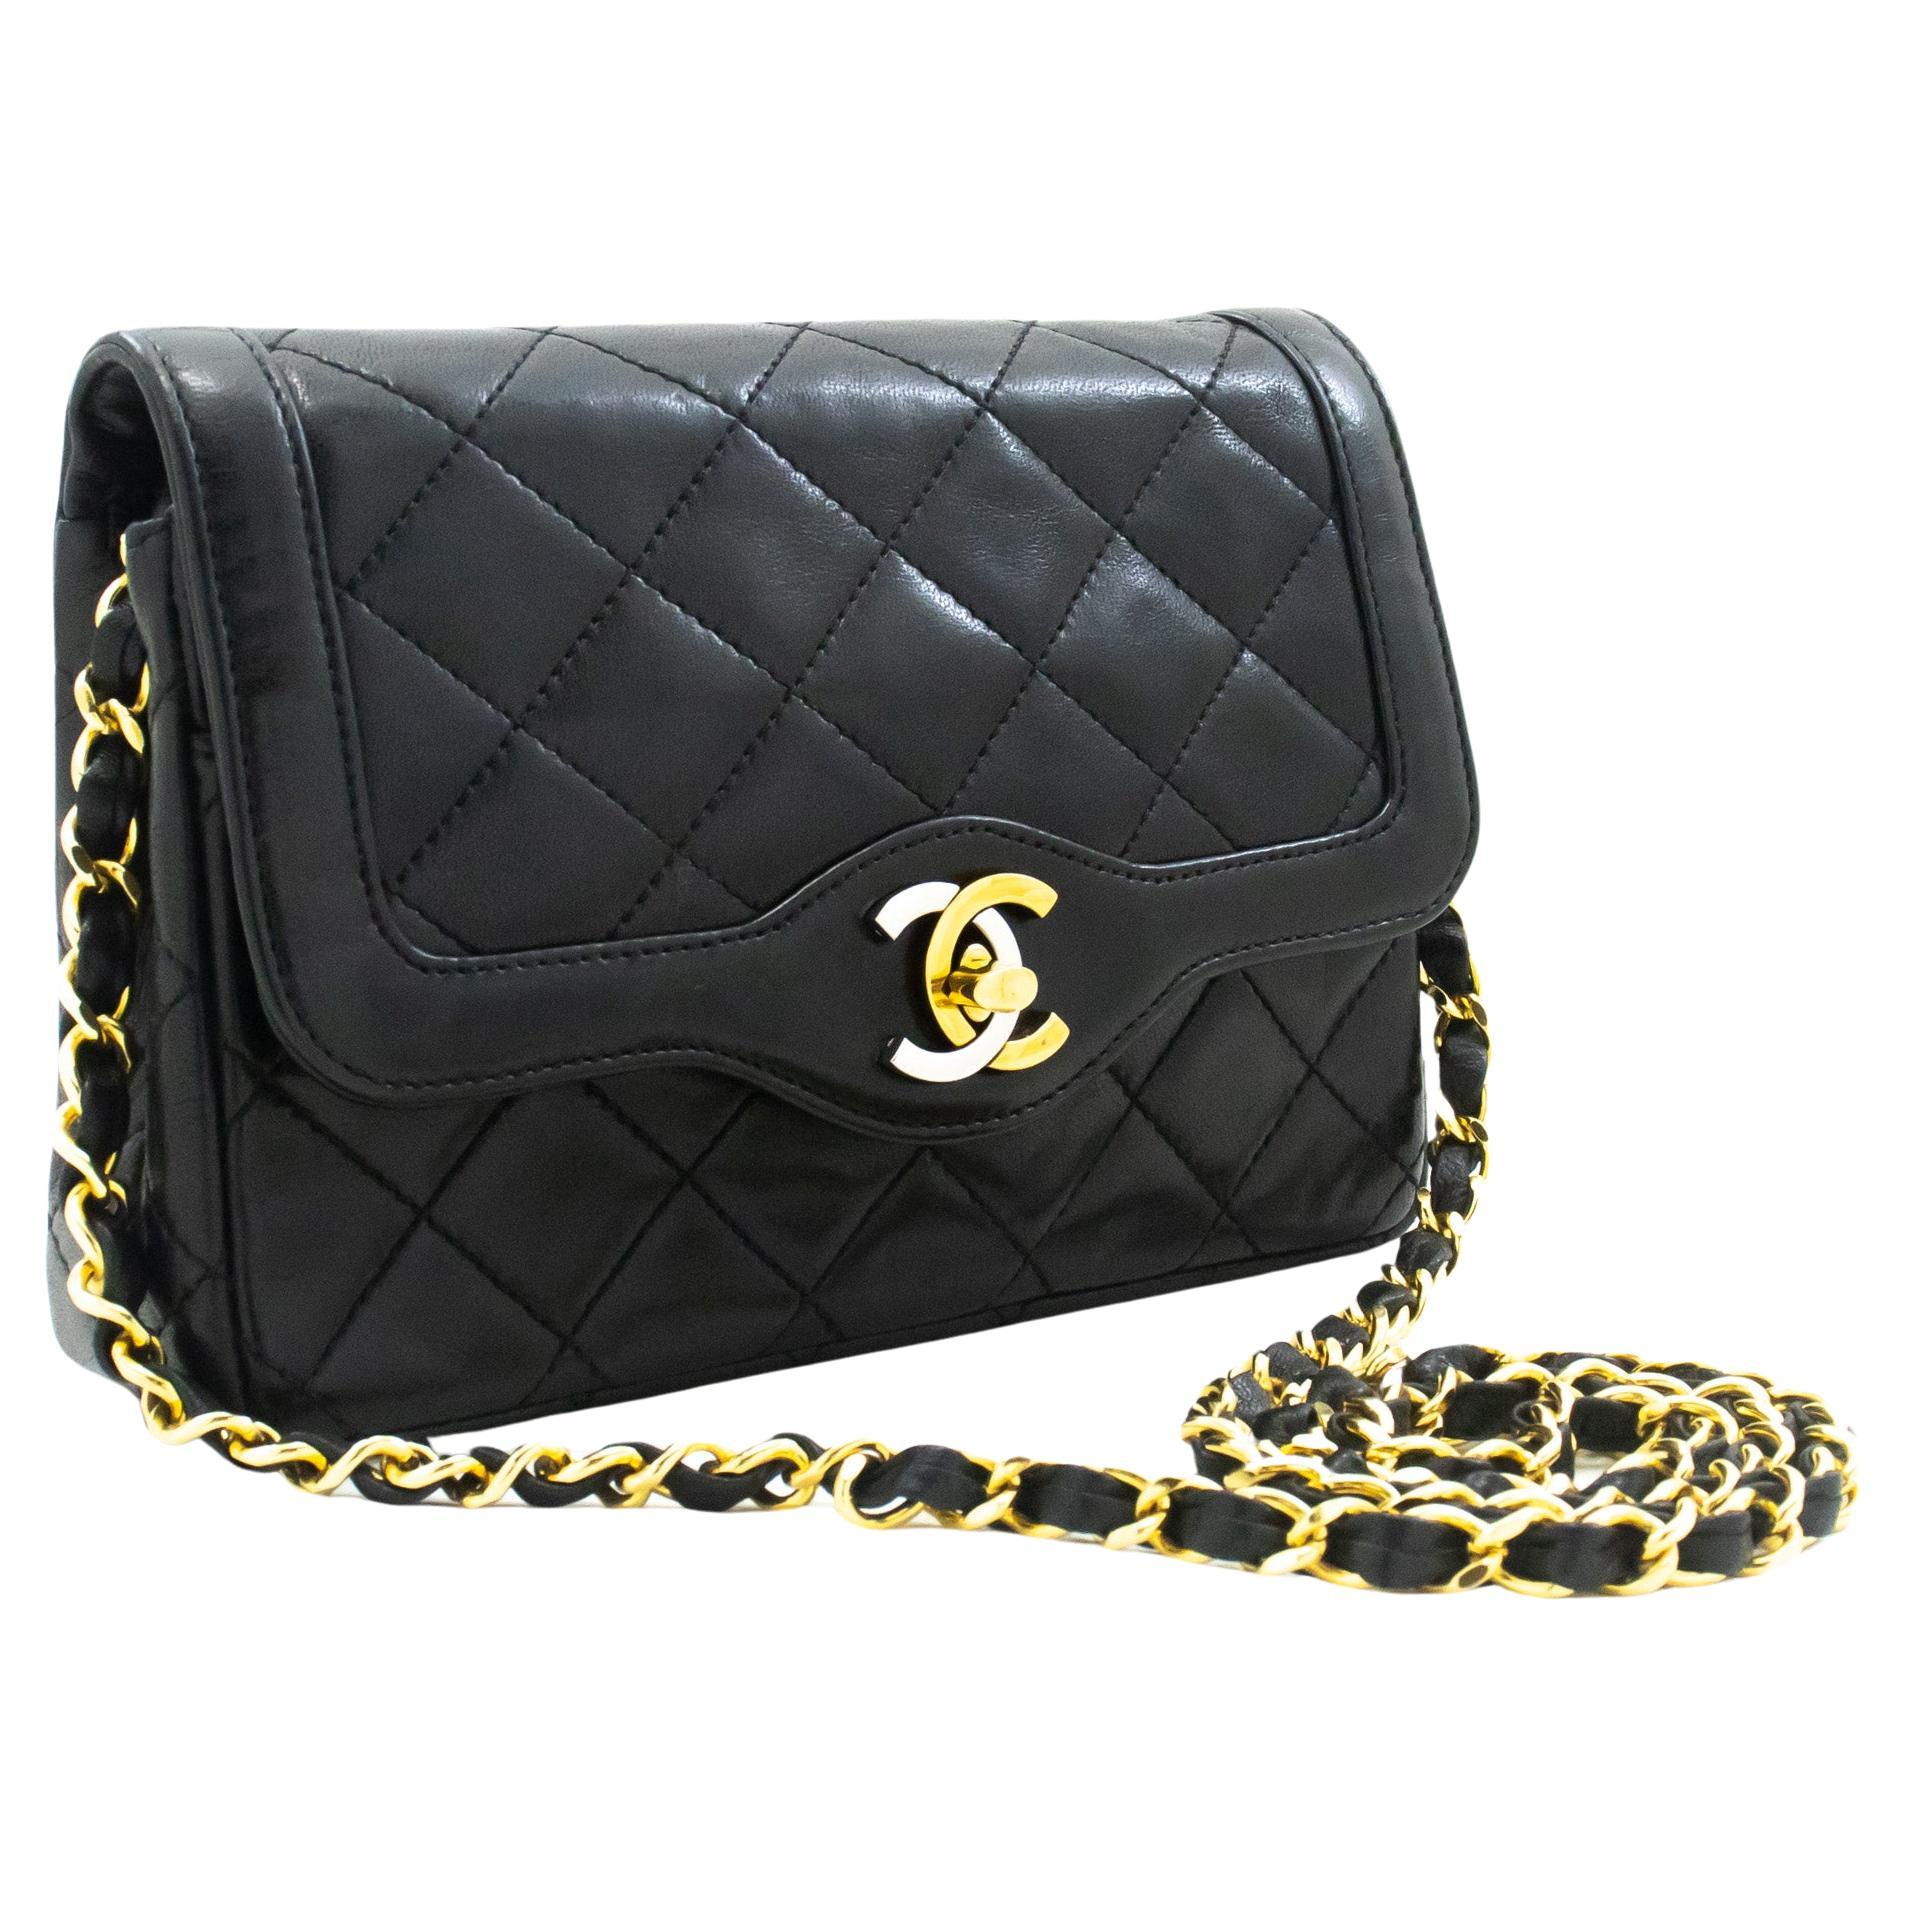 CHANEL Paris Limited Small Chain Shoulder Bag Black Flap Quilted For Sale